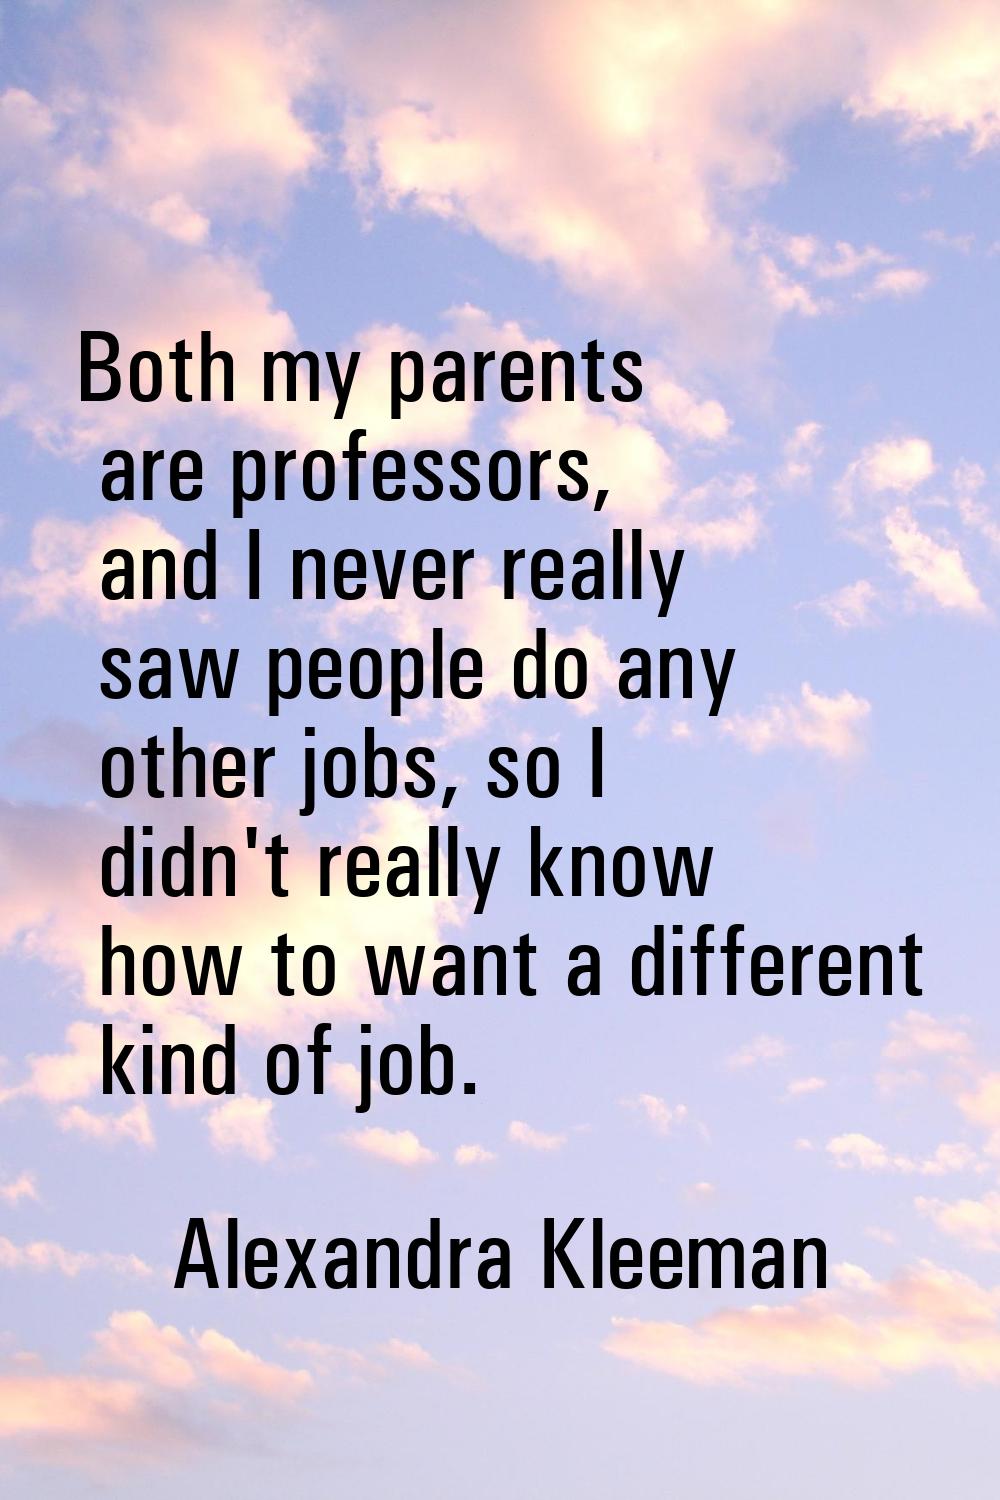 Both my parents are professors, and I never really saw people do any other jobs, so I didn't really